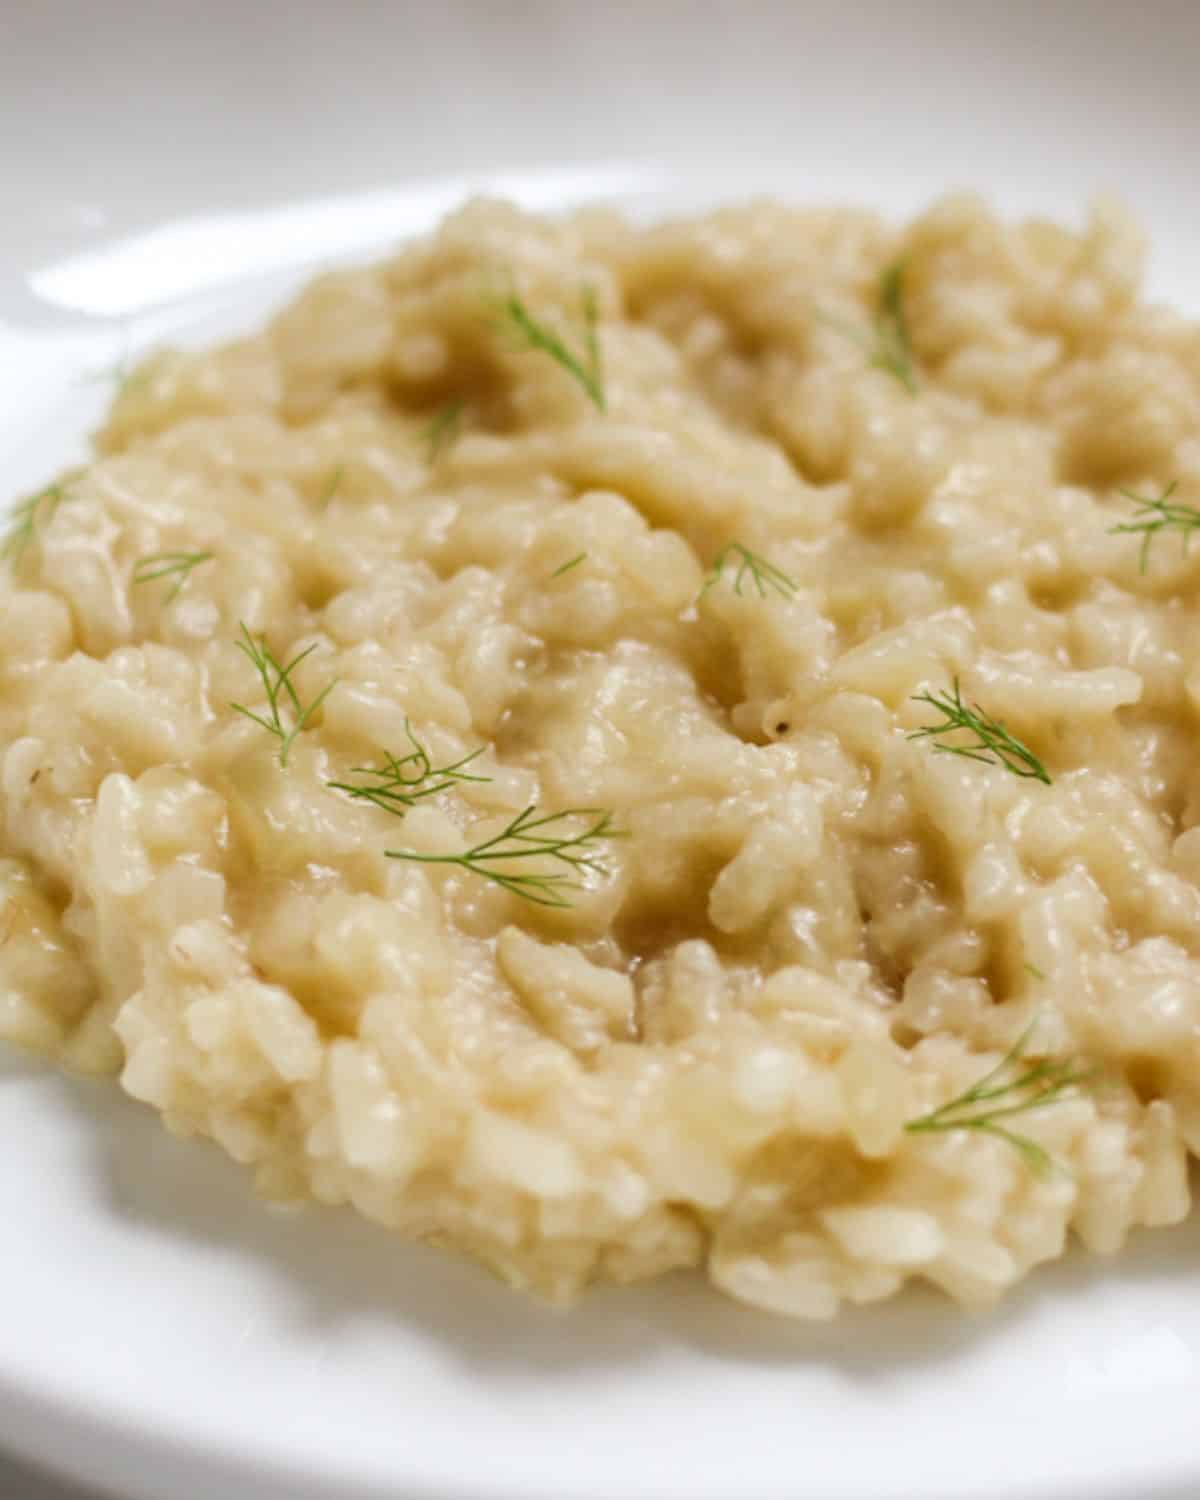 Creamy risotto in a white dish garnished with green fennel fronds.